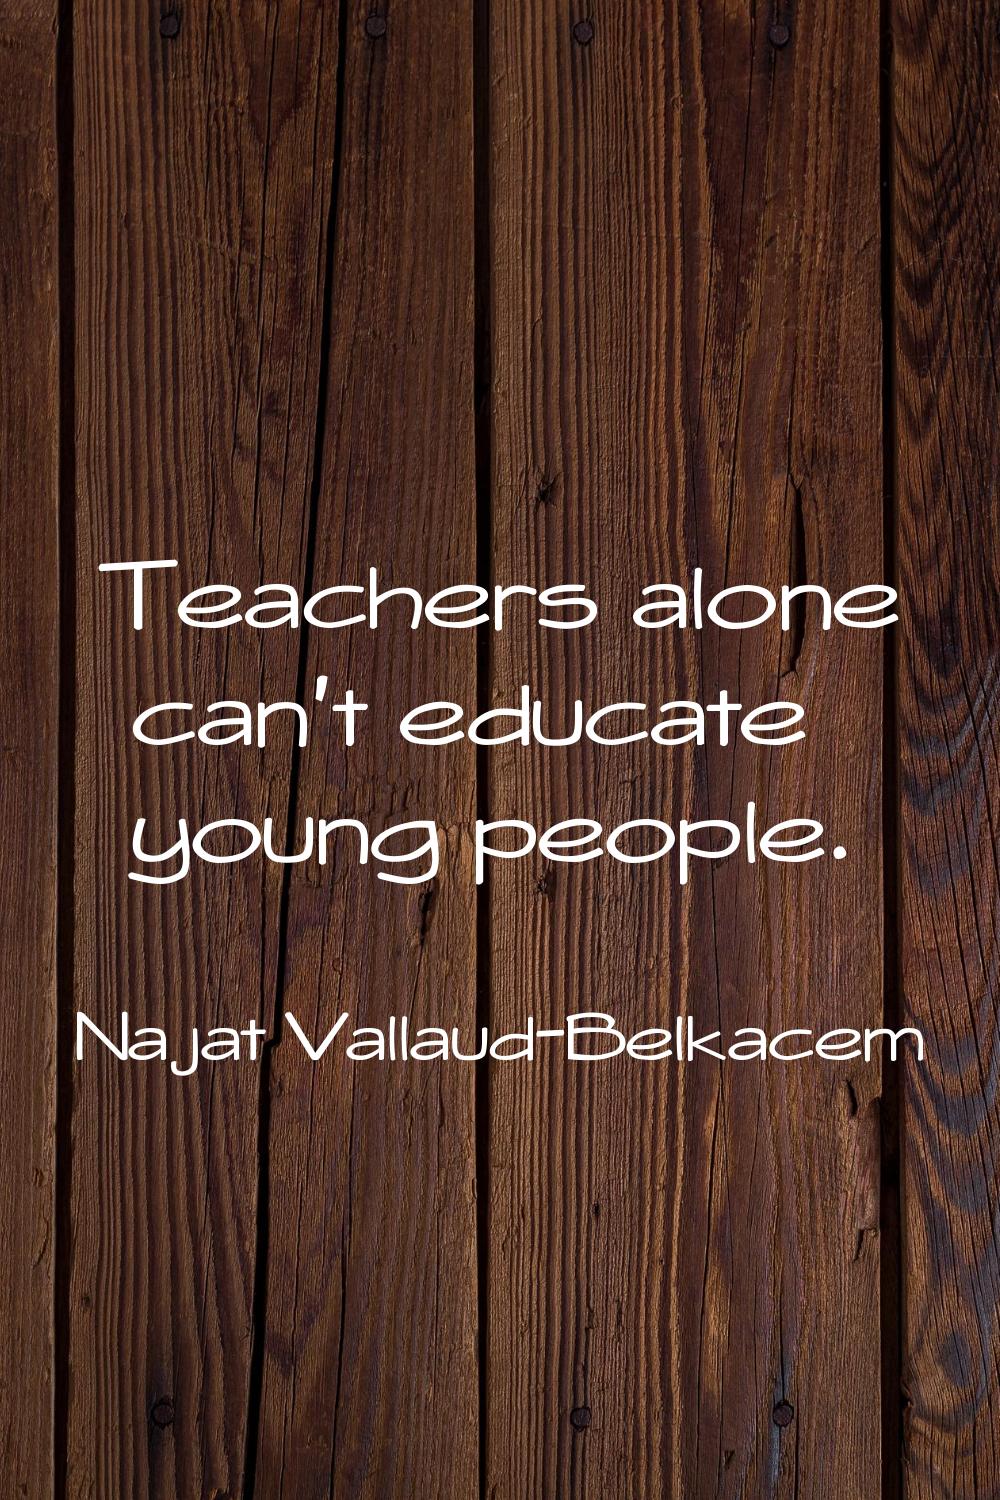 Teachers alone can't educate young people.